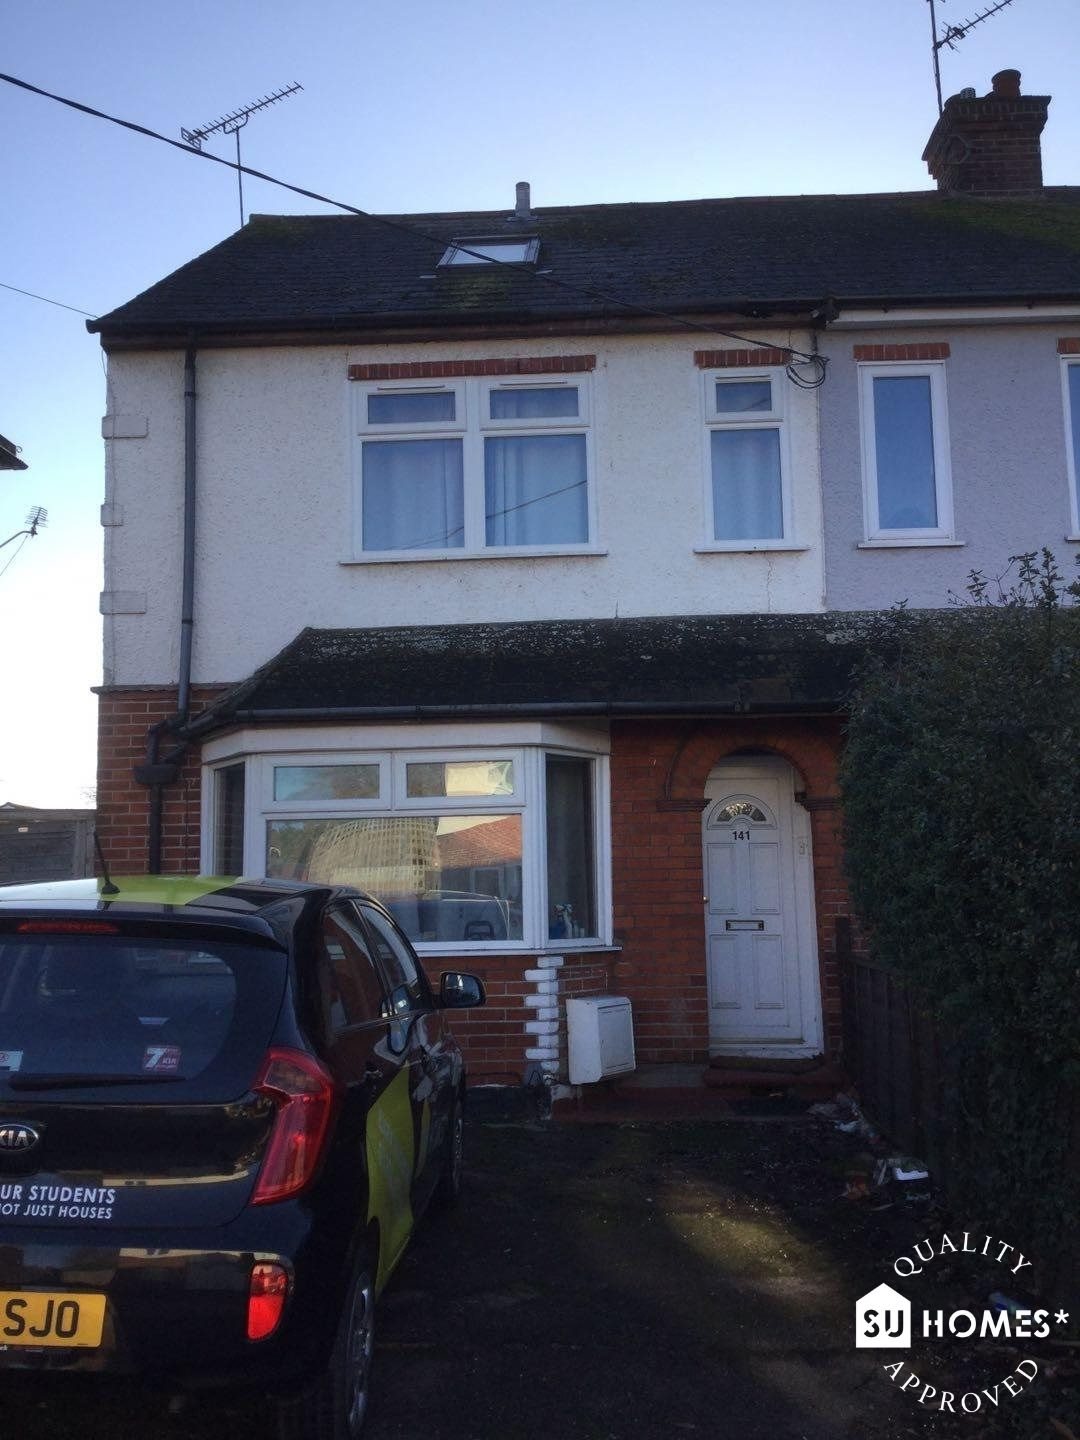 1 bed house / flat share to rent in Goring Road, CO4 